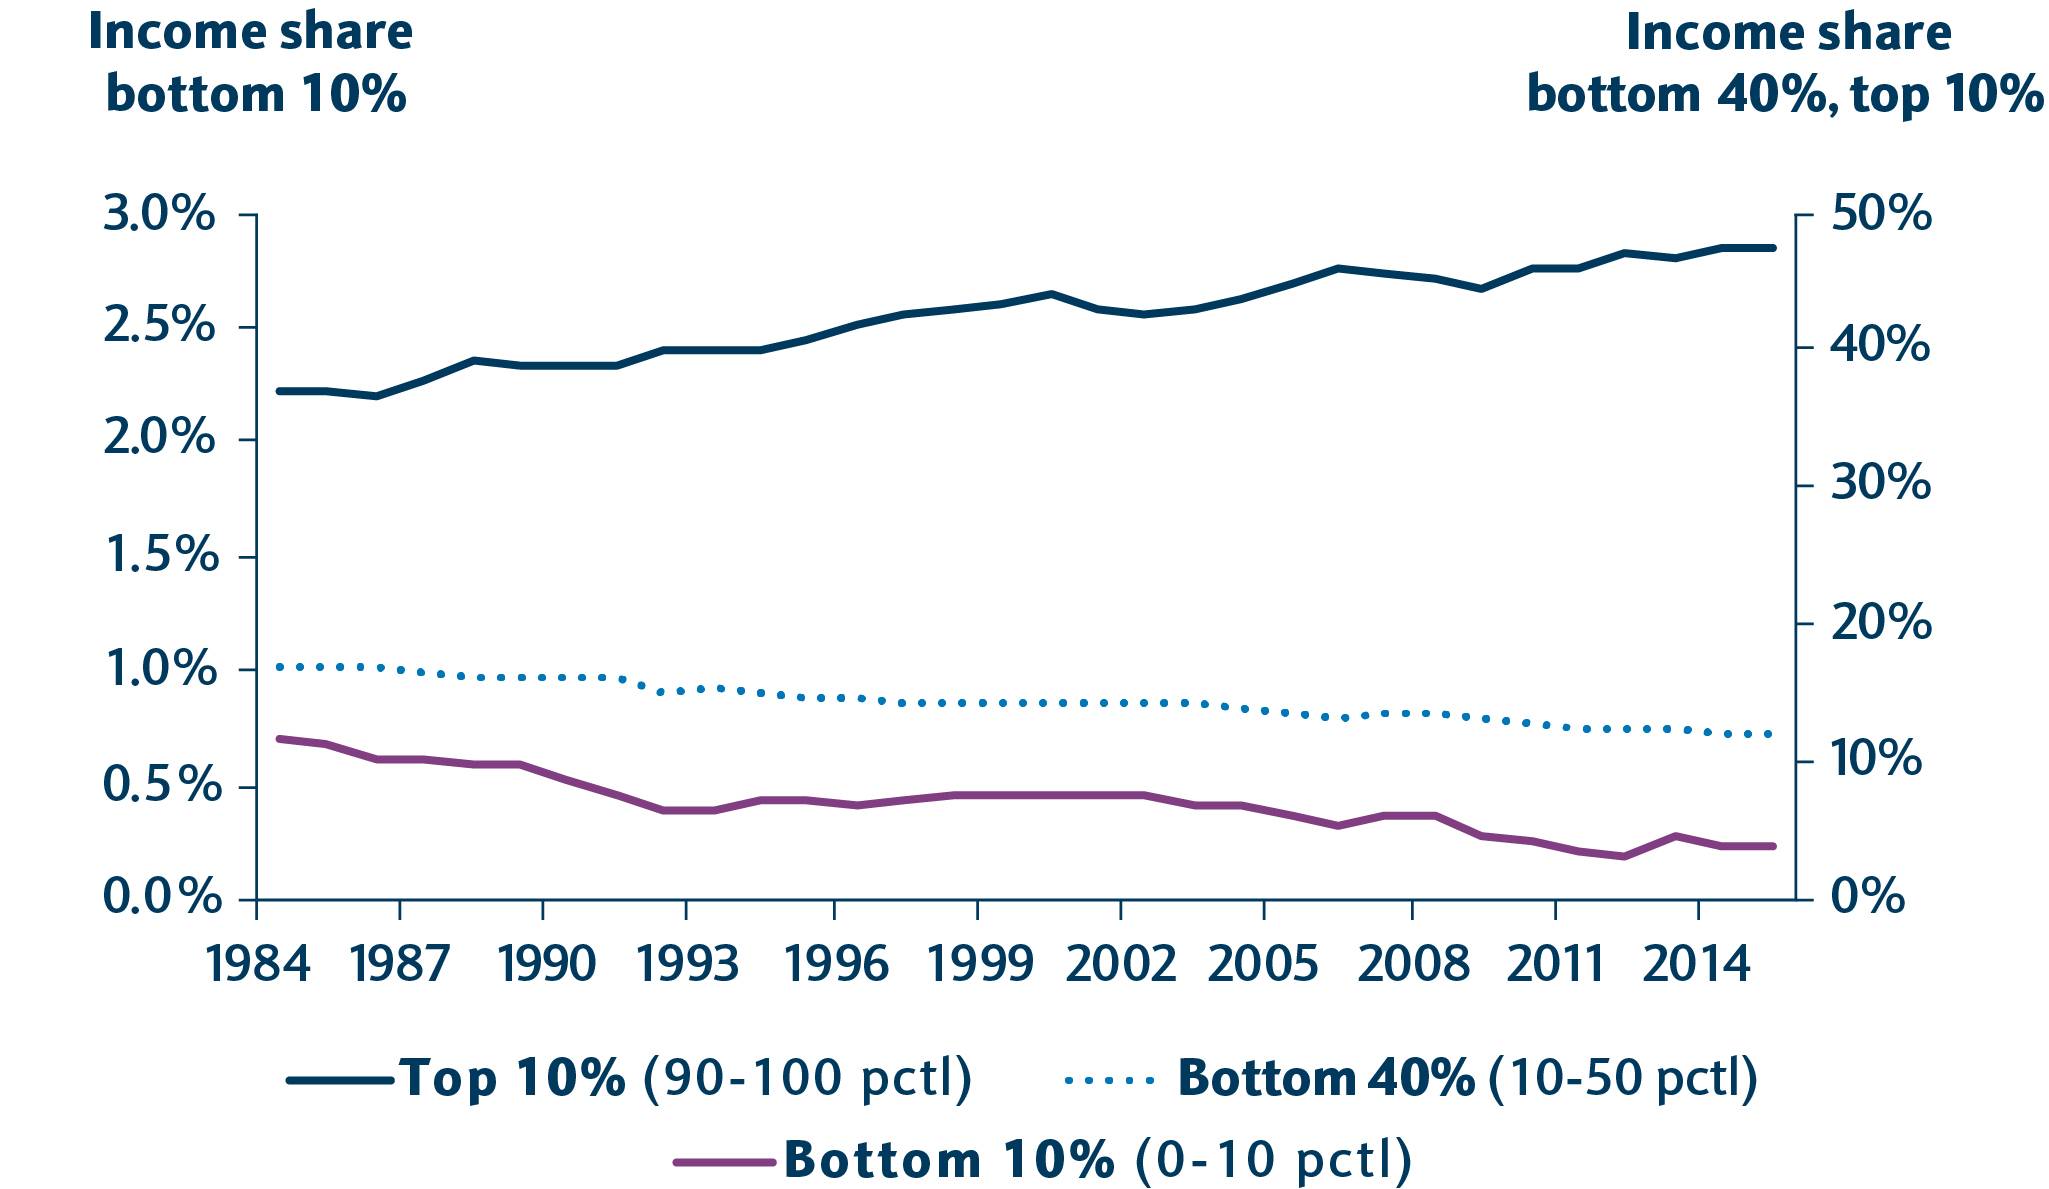 Line graph showing income share earned by bottom 10%, bottom 40% and top 10% from 1984-2017